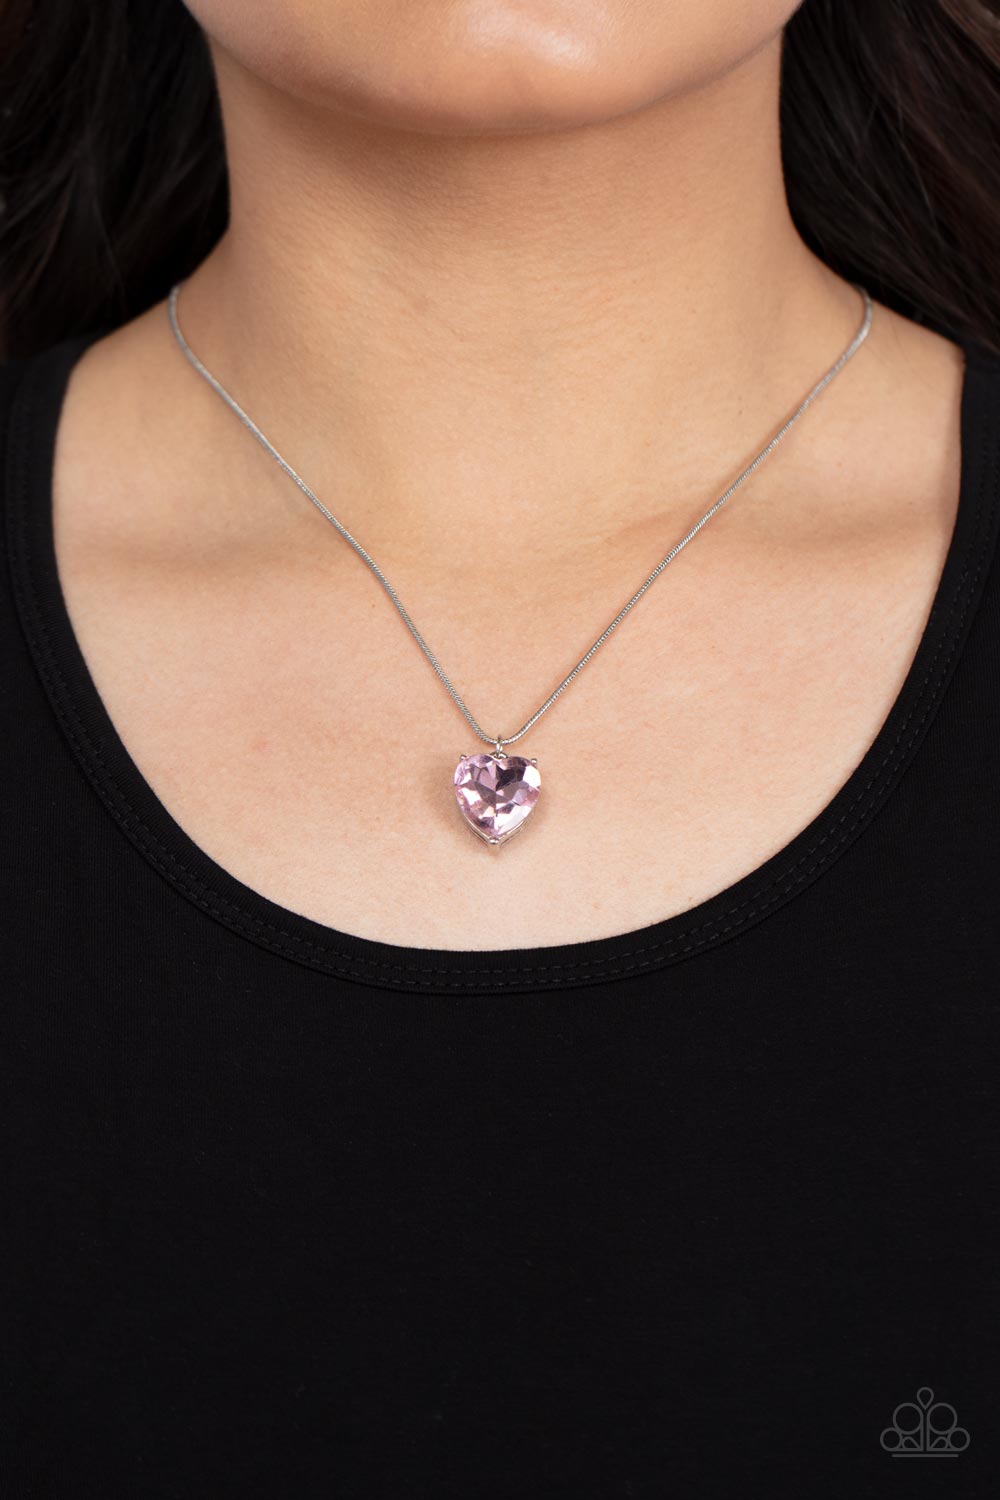 Smitten with Style Pink Rhinestone Heart Necklace - Paparazzi Accessories-on model - CarasShop.com - $5 Jewelry by Cara Jewels